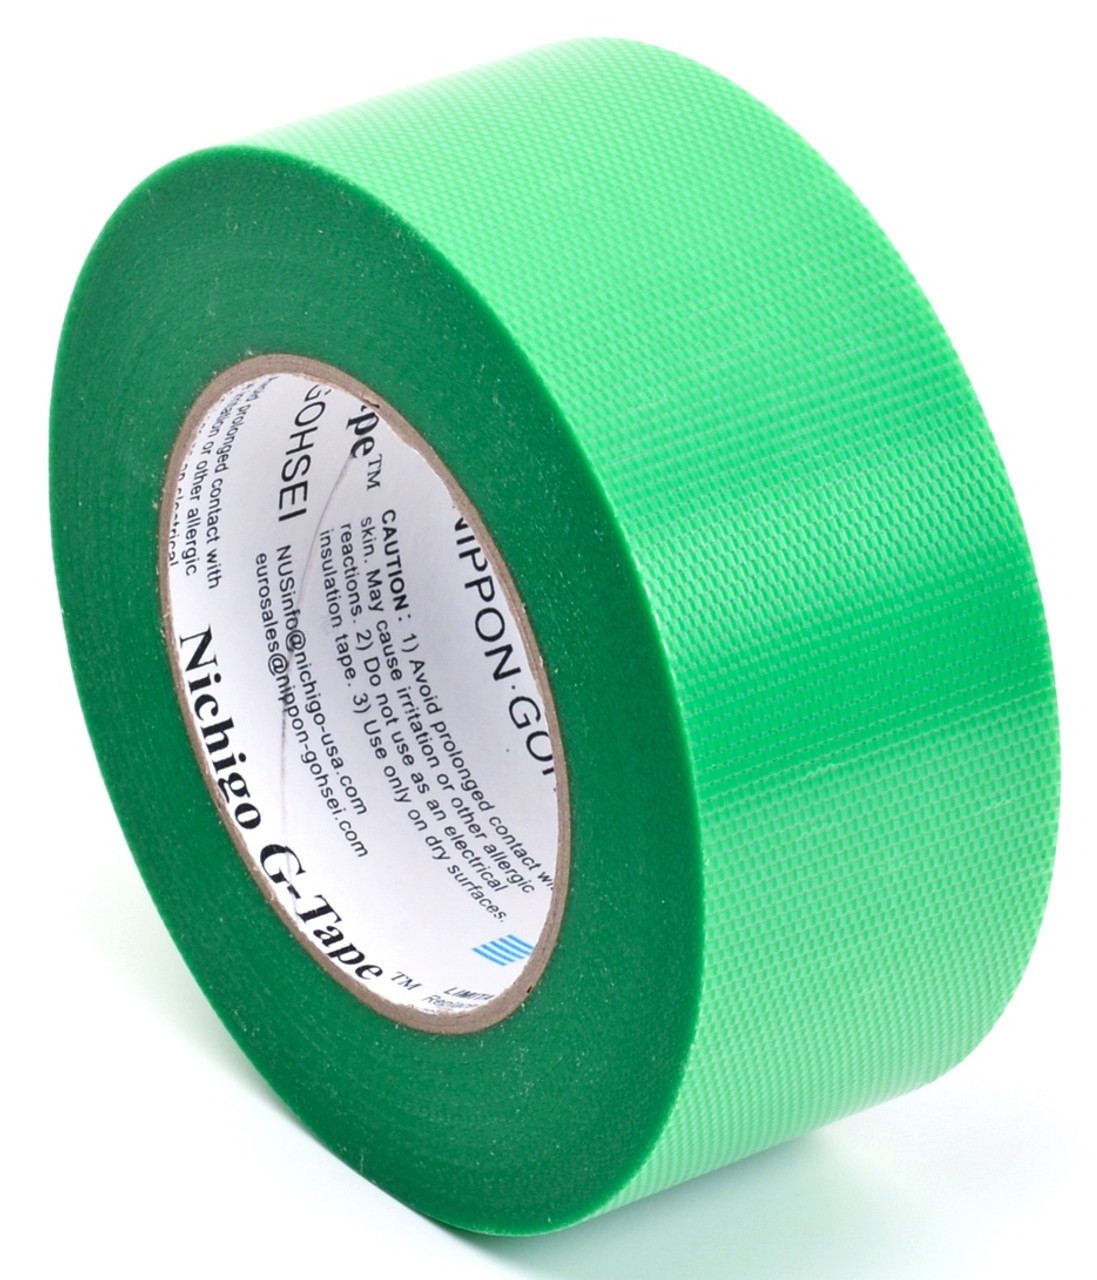 Gtape 1009 Green Low Residue Masking Tape 2 Wide By 164' Long